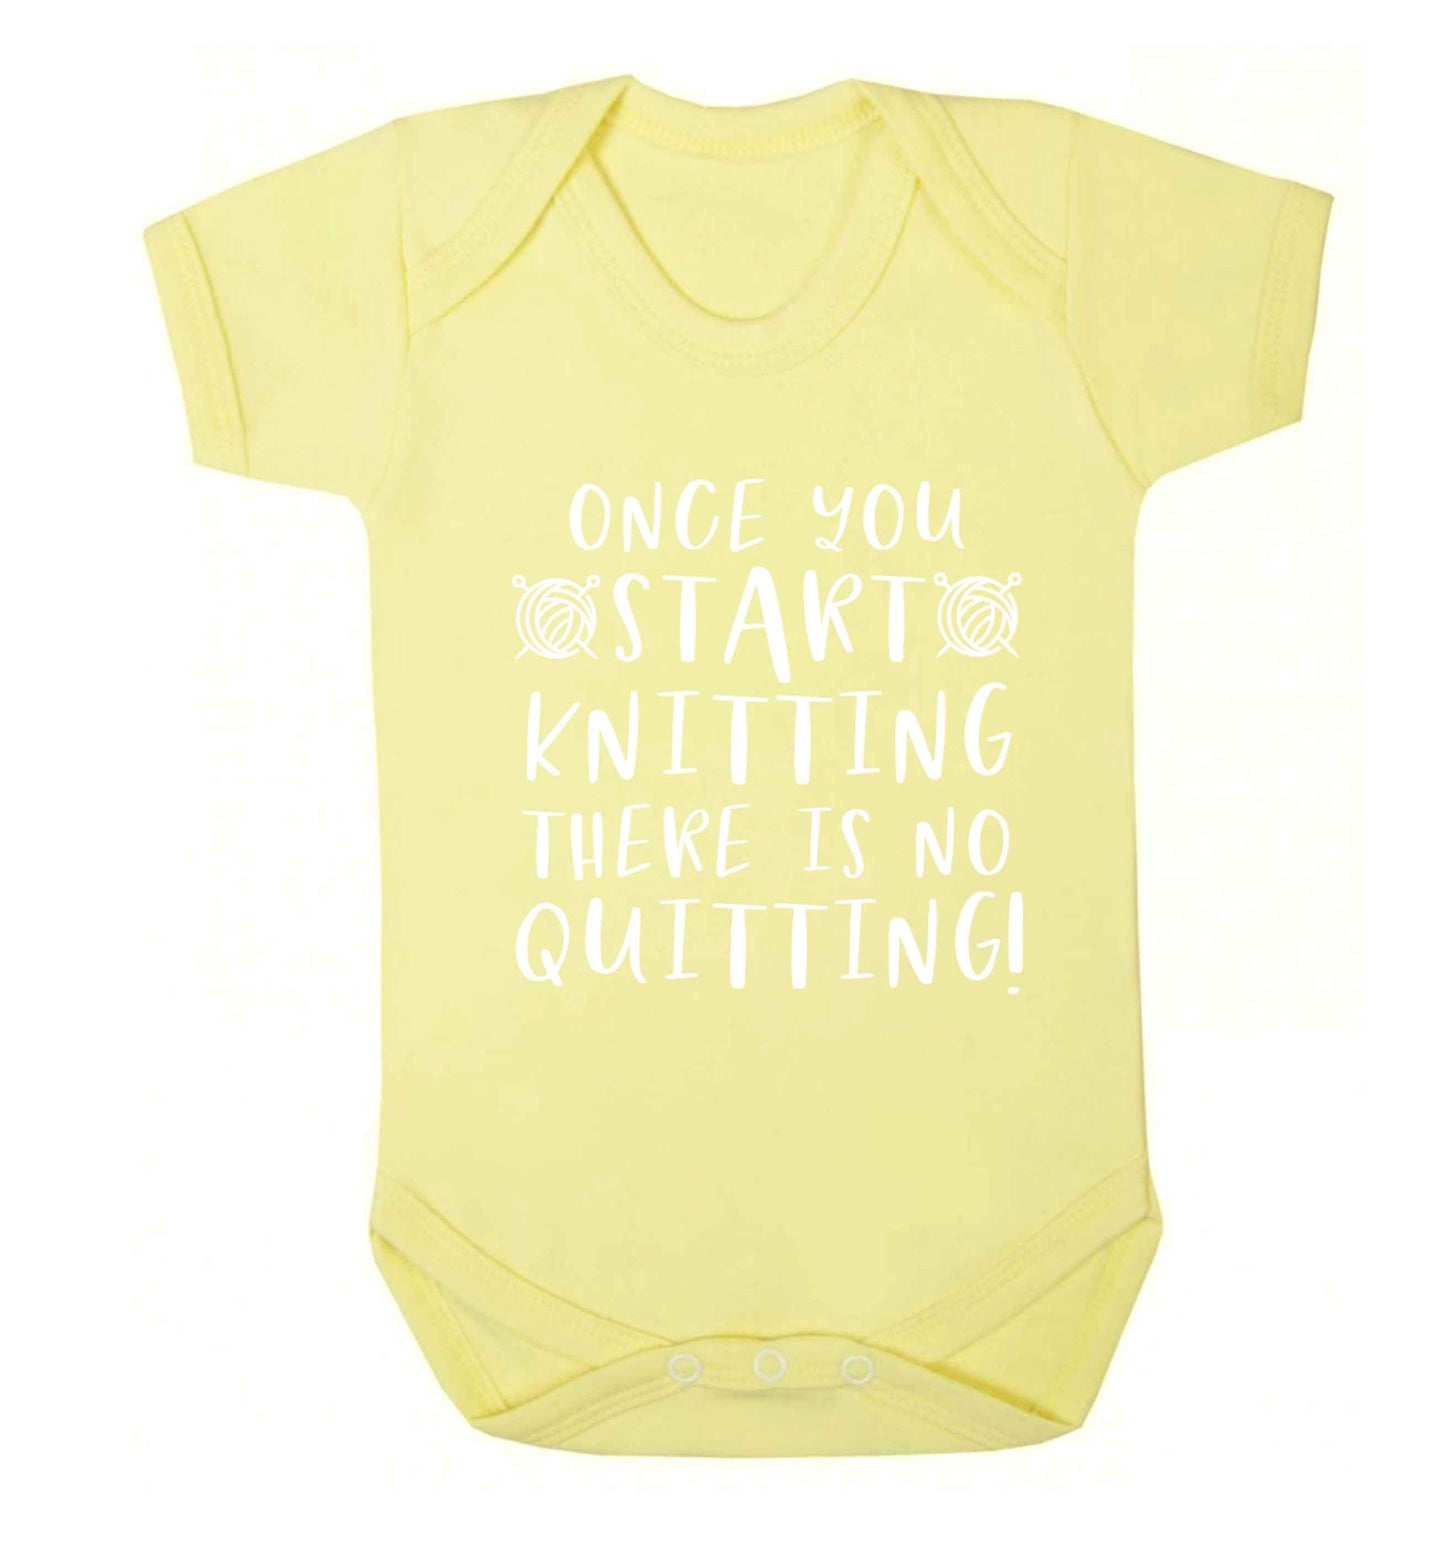 Once you start knitting there is no quitting! Baby Vest pale yellow 18-24 months